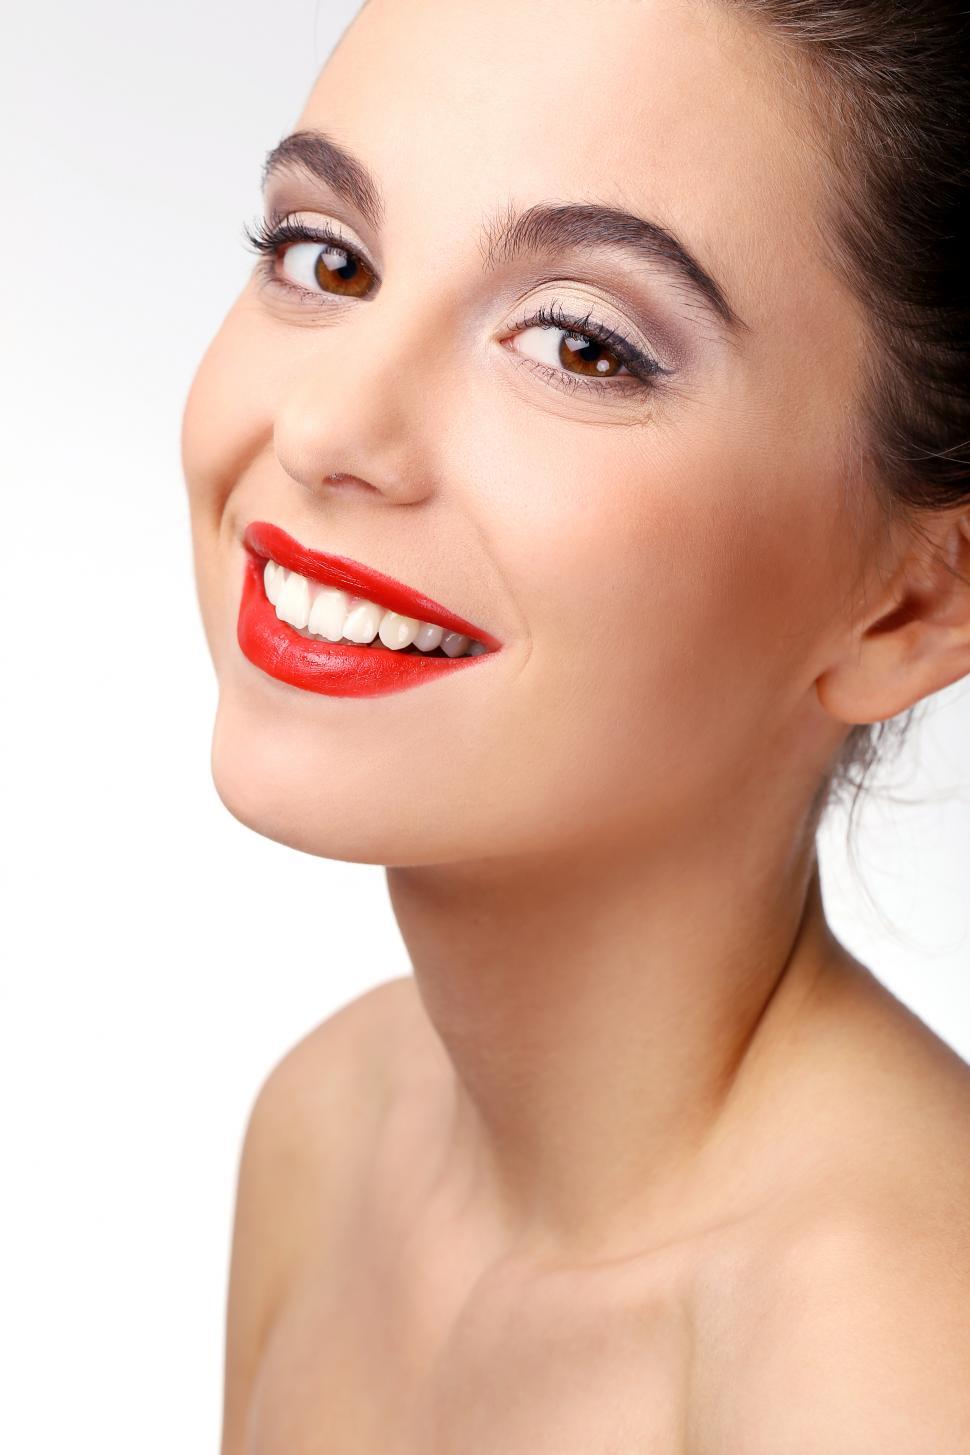 Free Image of Smiling girl with perfect skin and red lipstick 